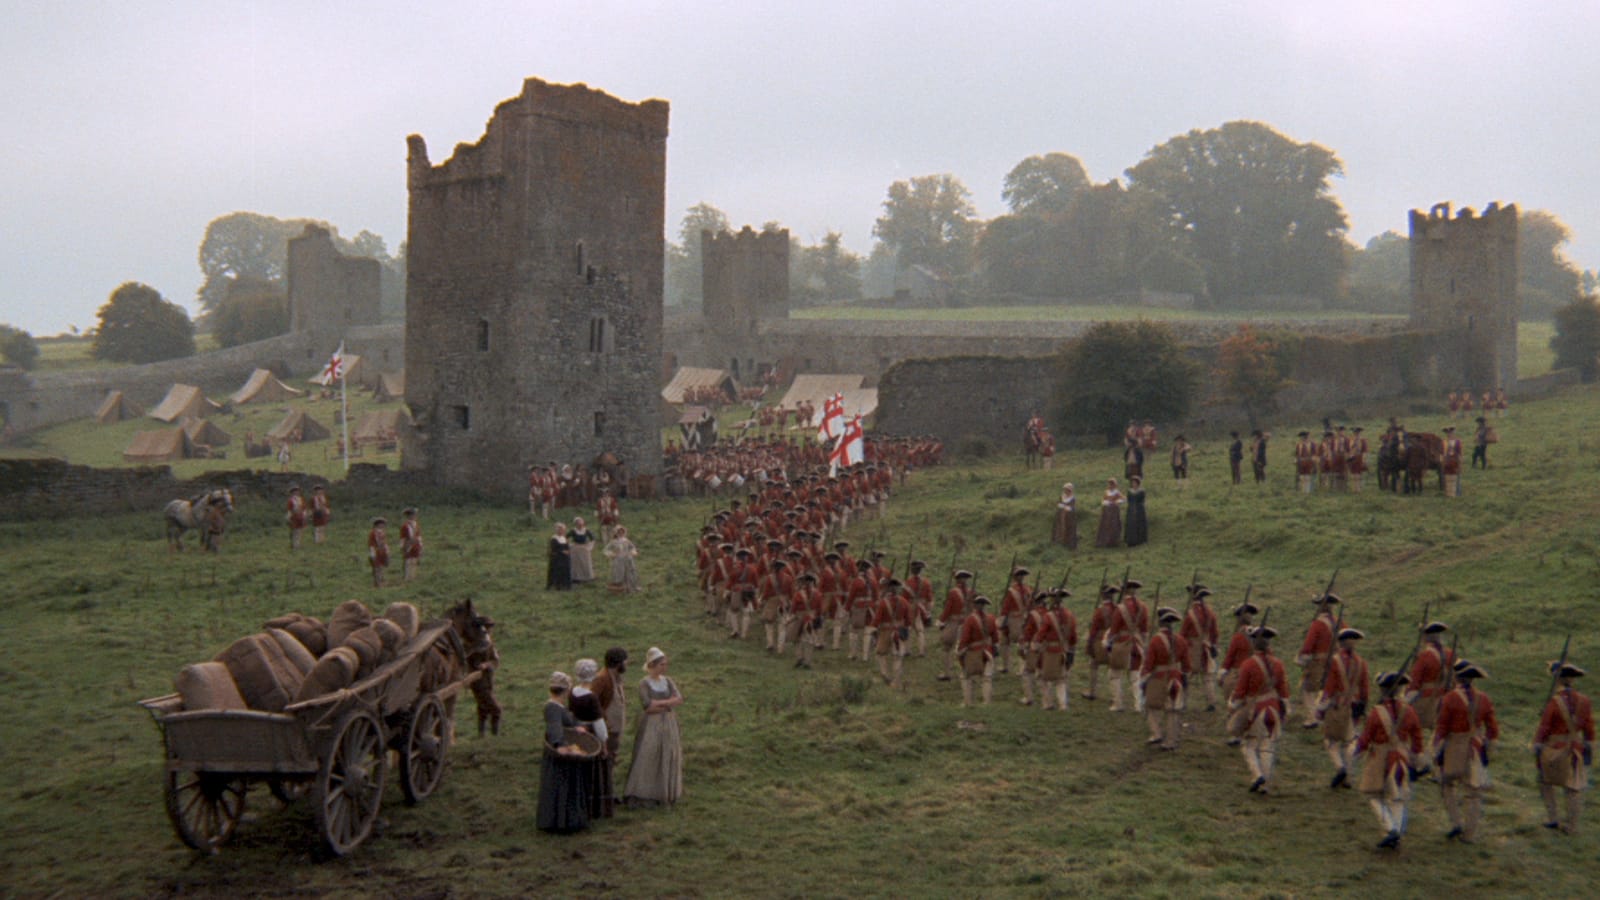 Barry Lyndon (1975). The Criterion Collection